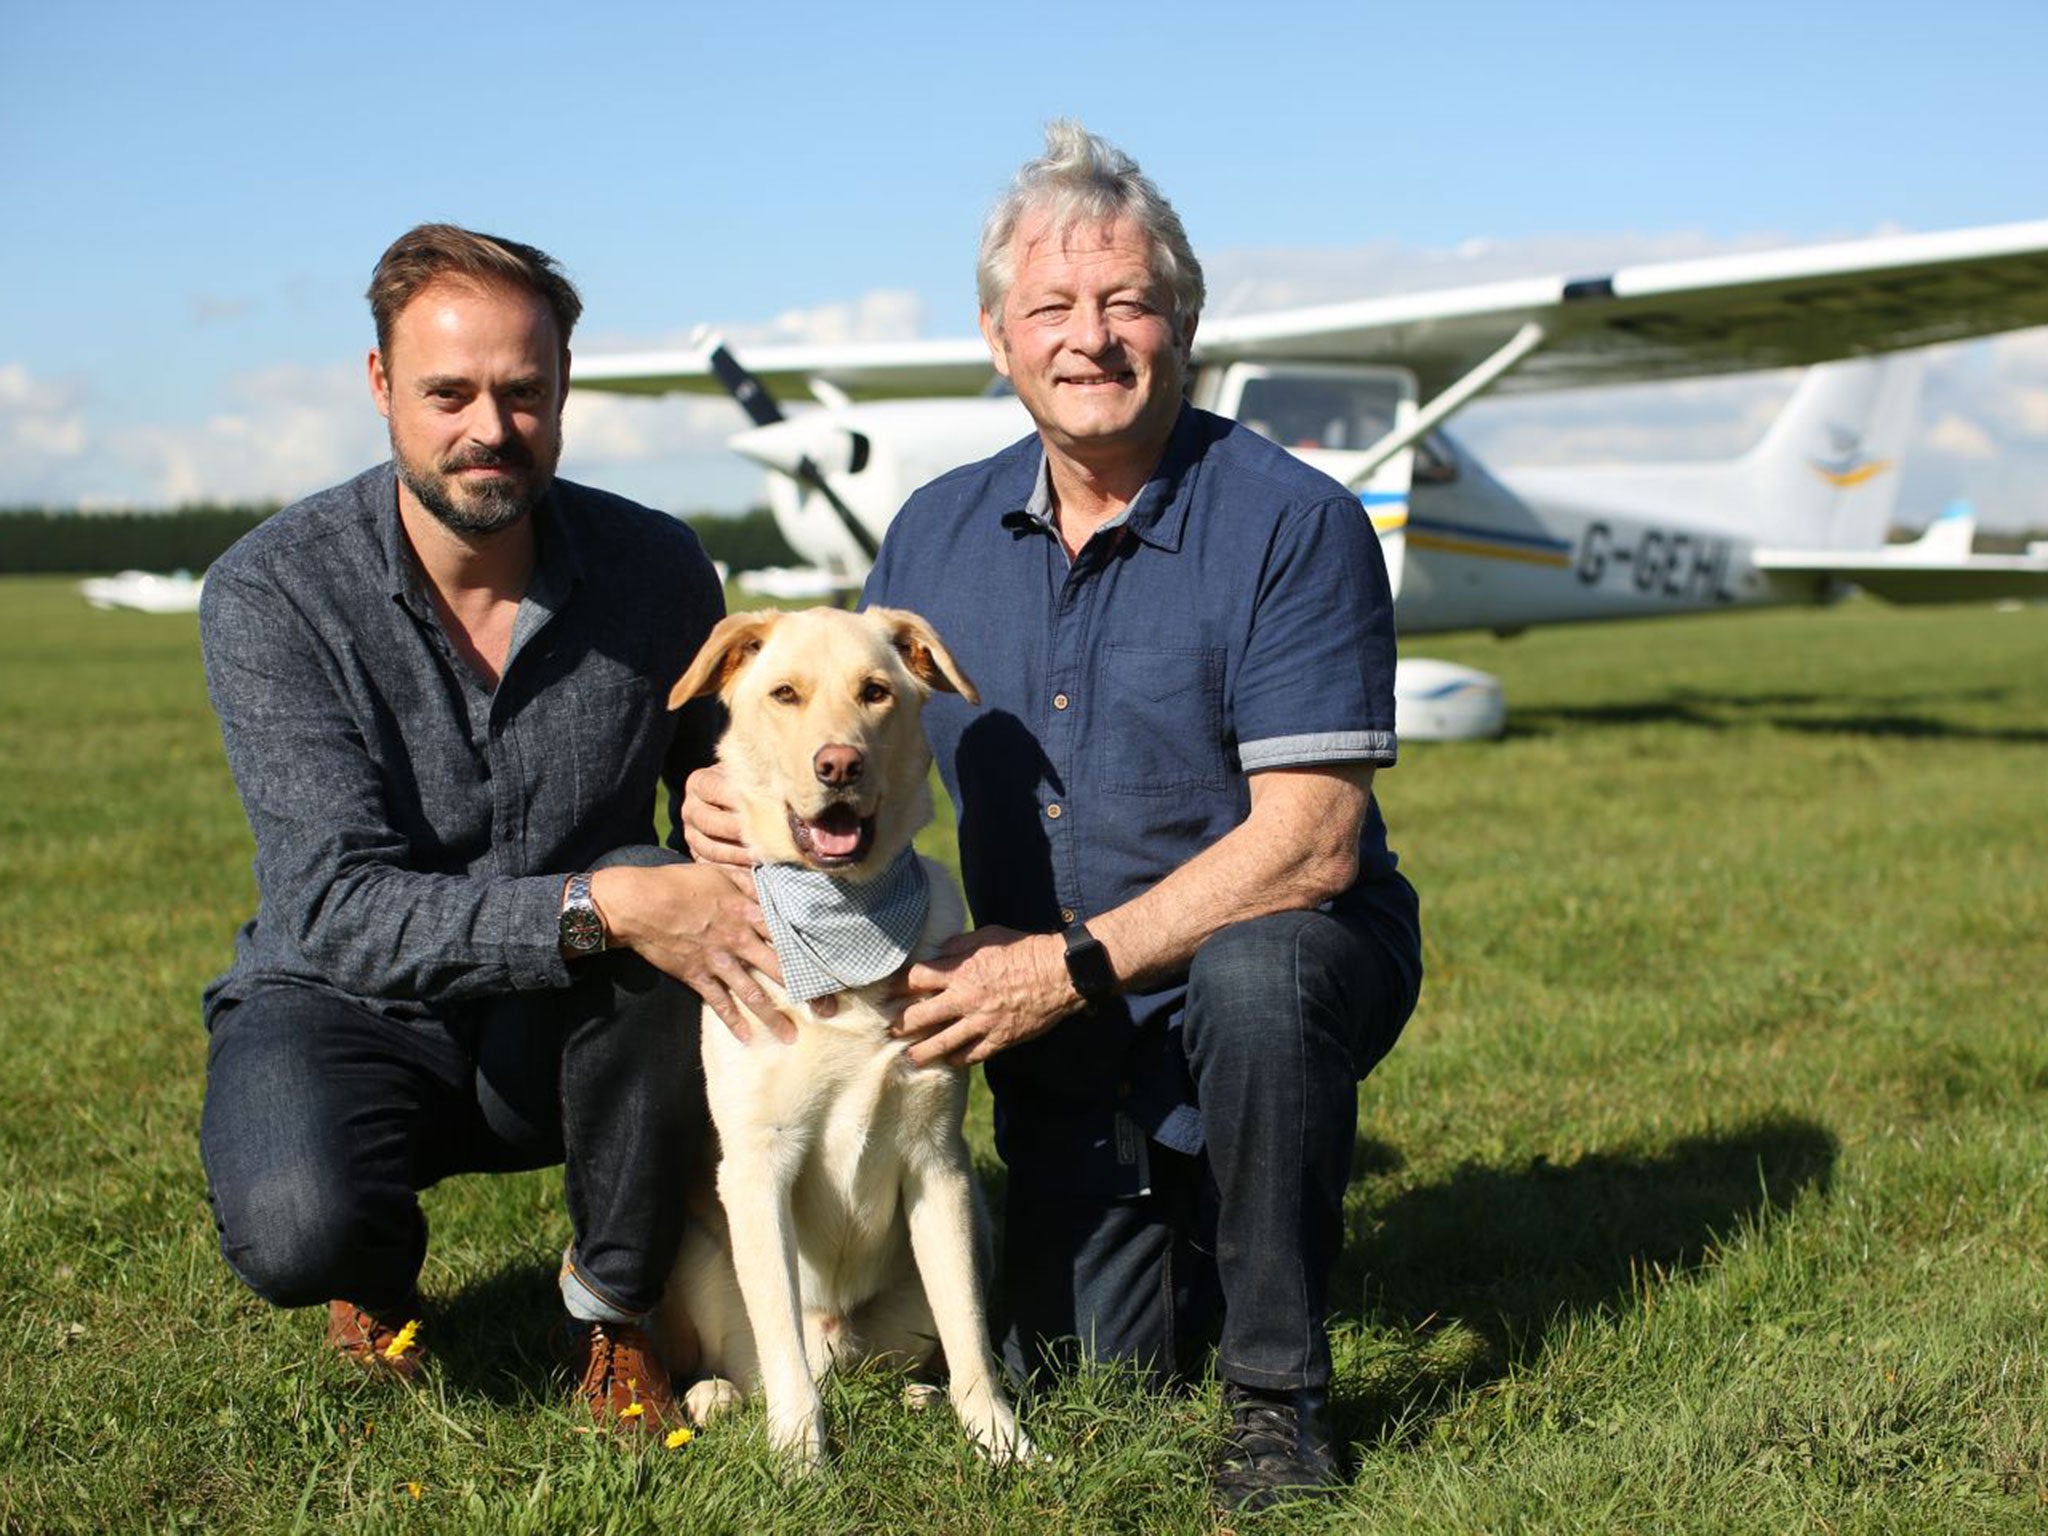 Honey, pictured with presenter Jamie Theakston and expert Mark Vette, is a high-energy lurcher cross. Two years old, she’s very loving, despite being a stray